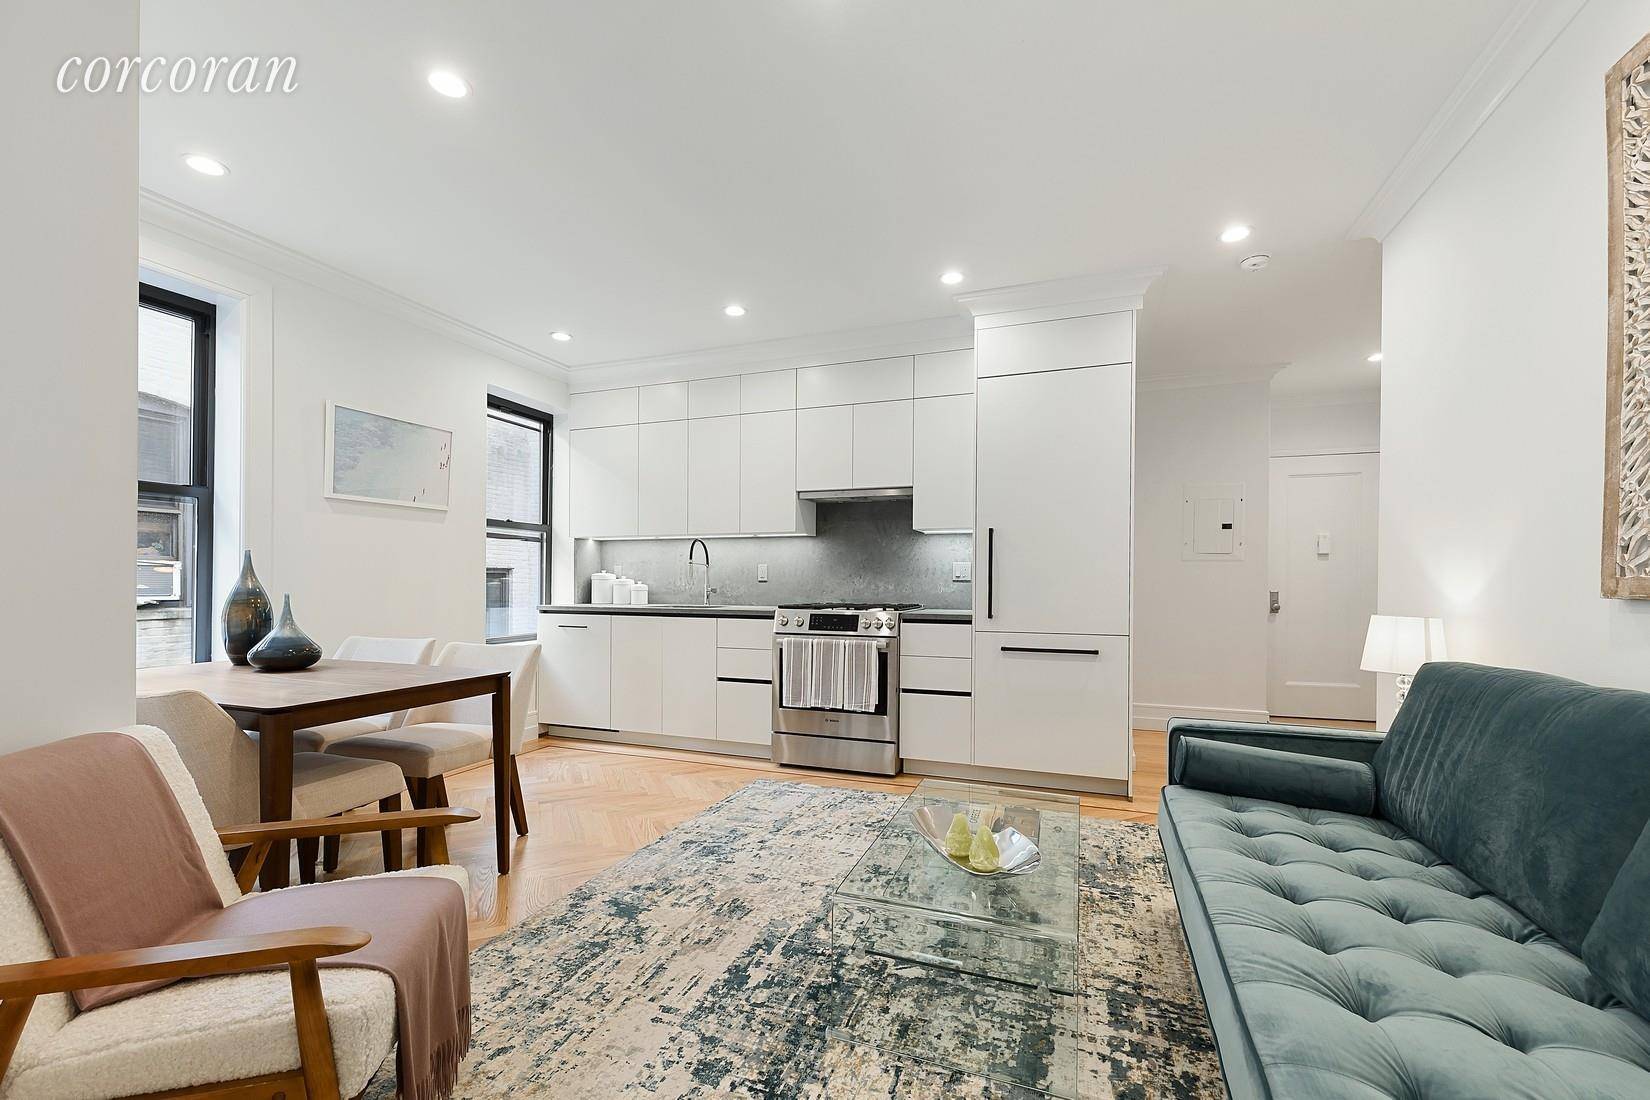 Presenting Astoria Lights four completely renovated pre war co op buildings that have been reimagined and reinvigorated with open, loft style floor plans, cutting edge amenities and sophisticated modern style ...